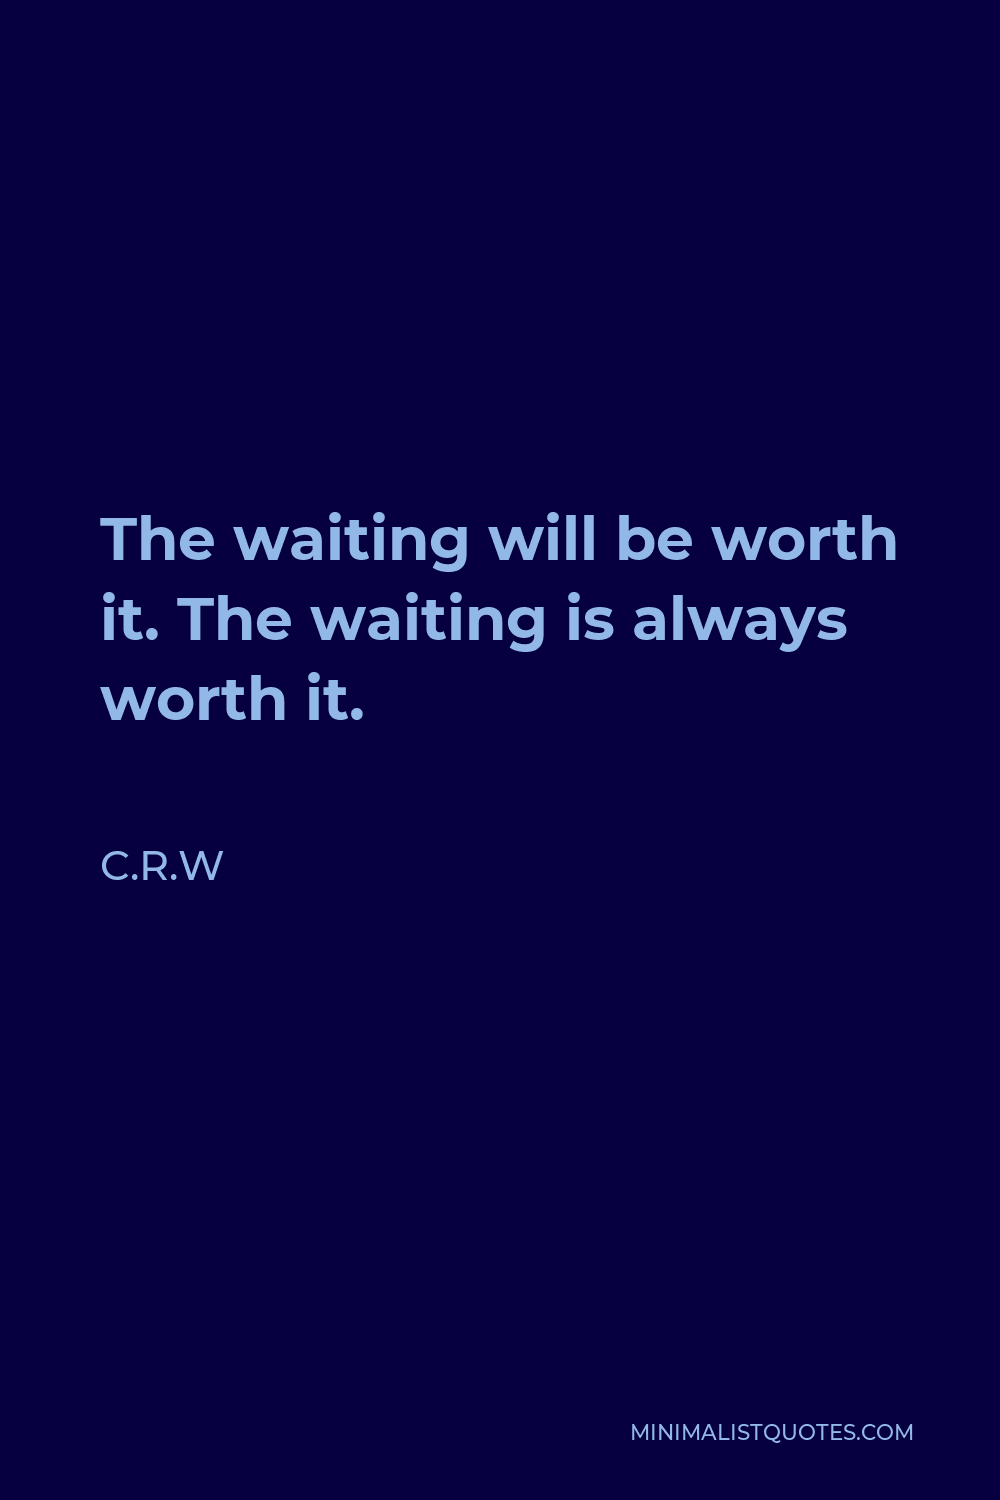 C.R.W Quote - The waiting will be worth it. The waiting is always worth it.